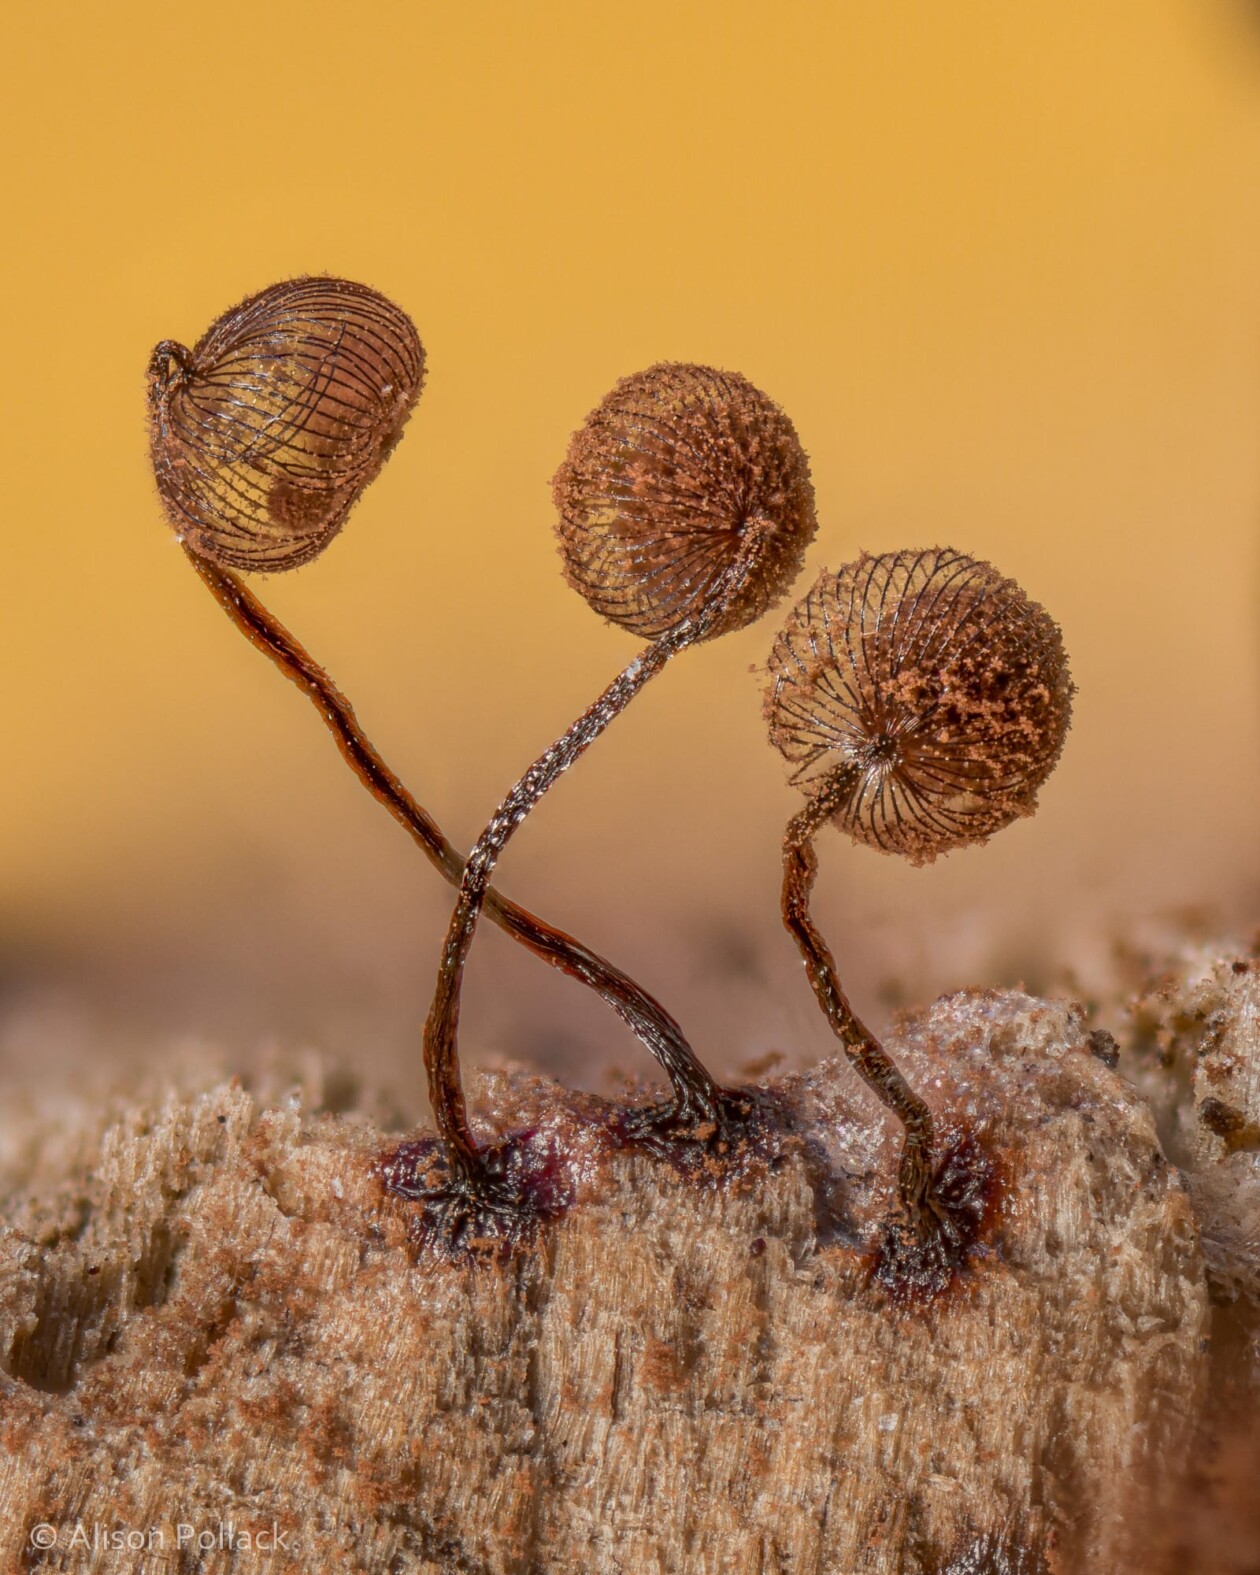 The Microscopic Majesty Of Mushrooms And Molds Captured By Alison Pollack (17)